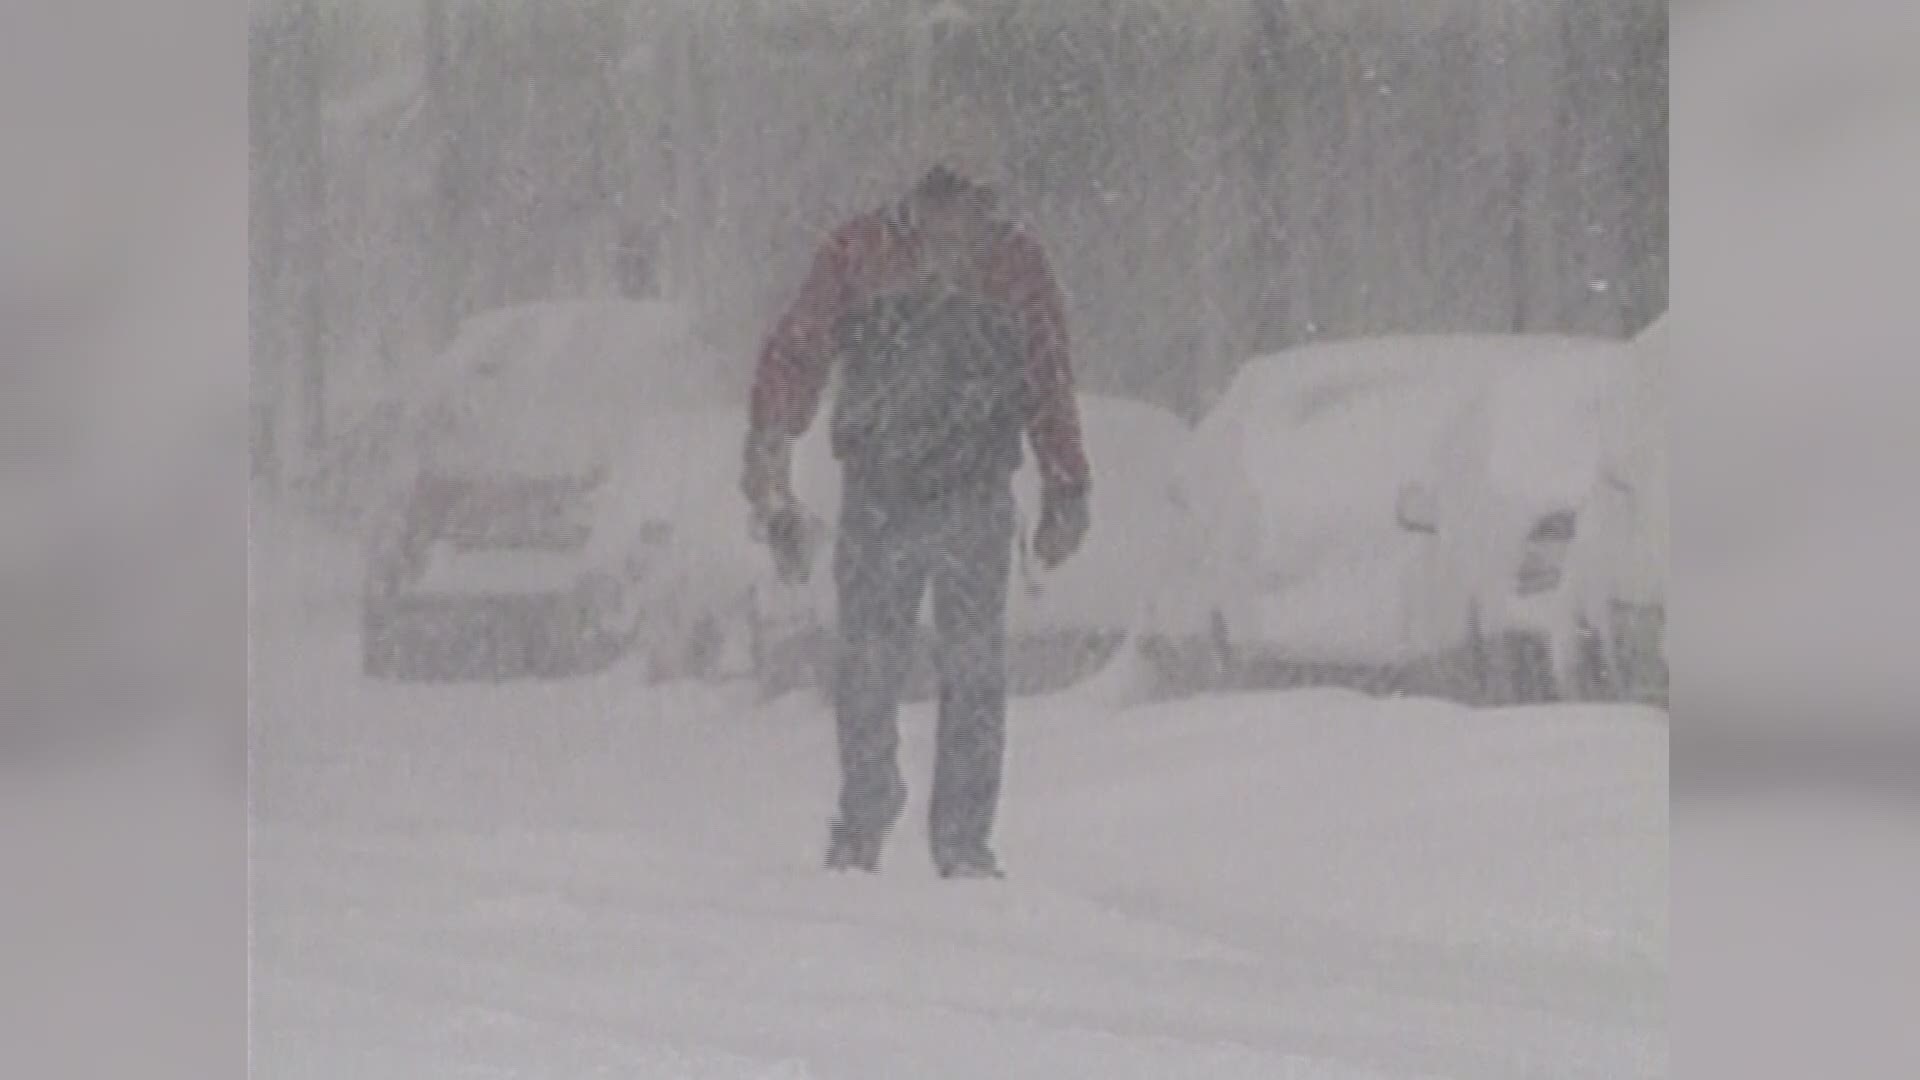 This is an archived story of the costs of the Blizzard of '93. This aired on March 19, 1993.